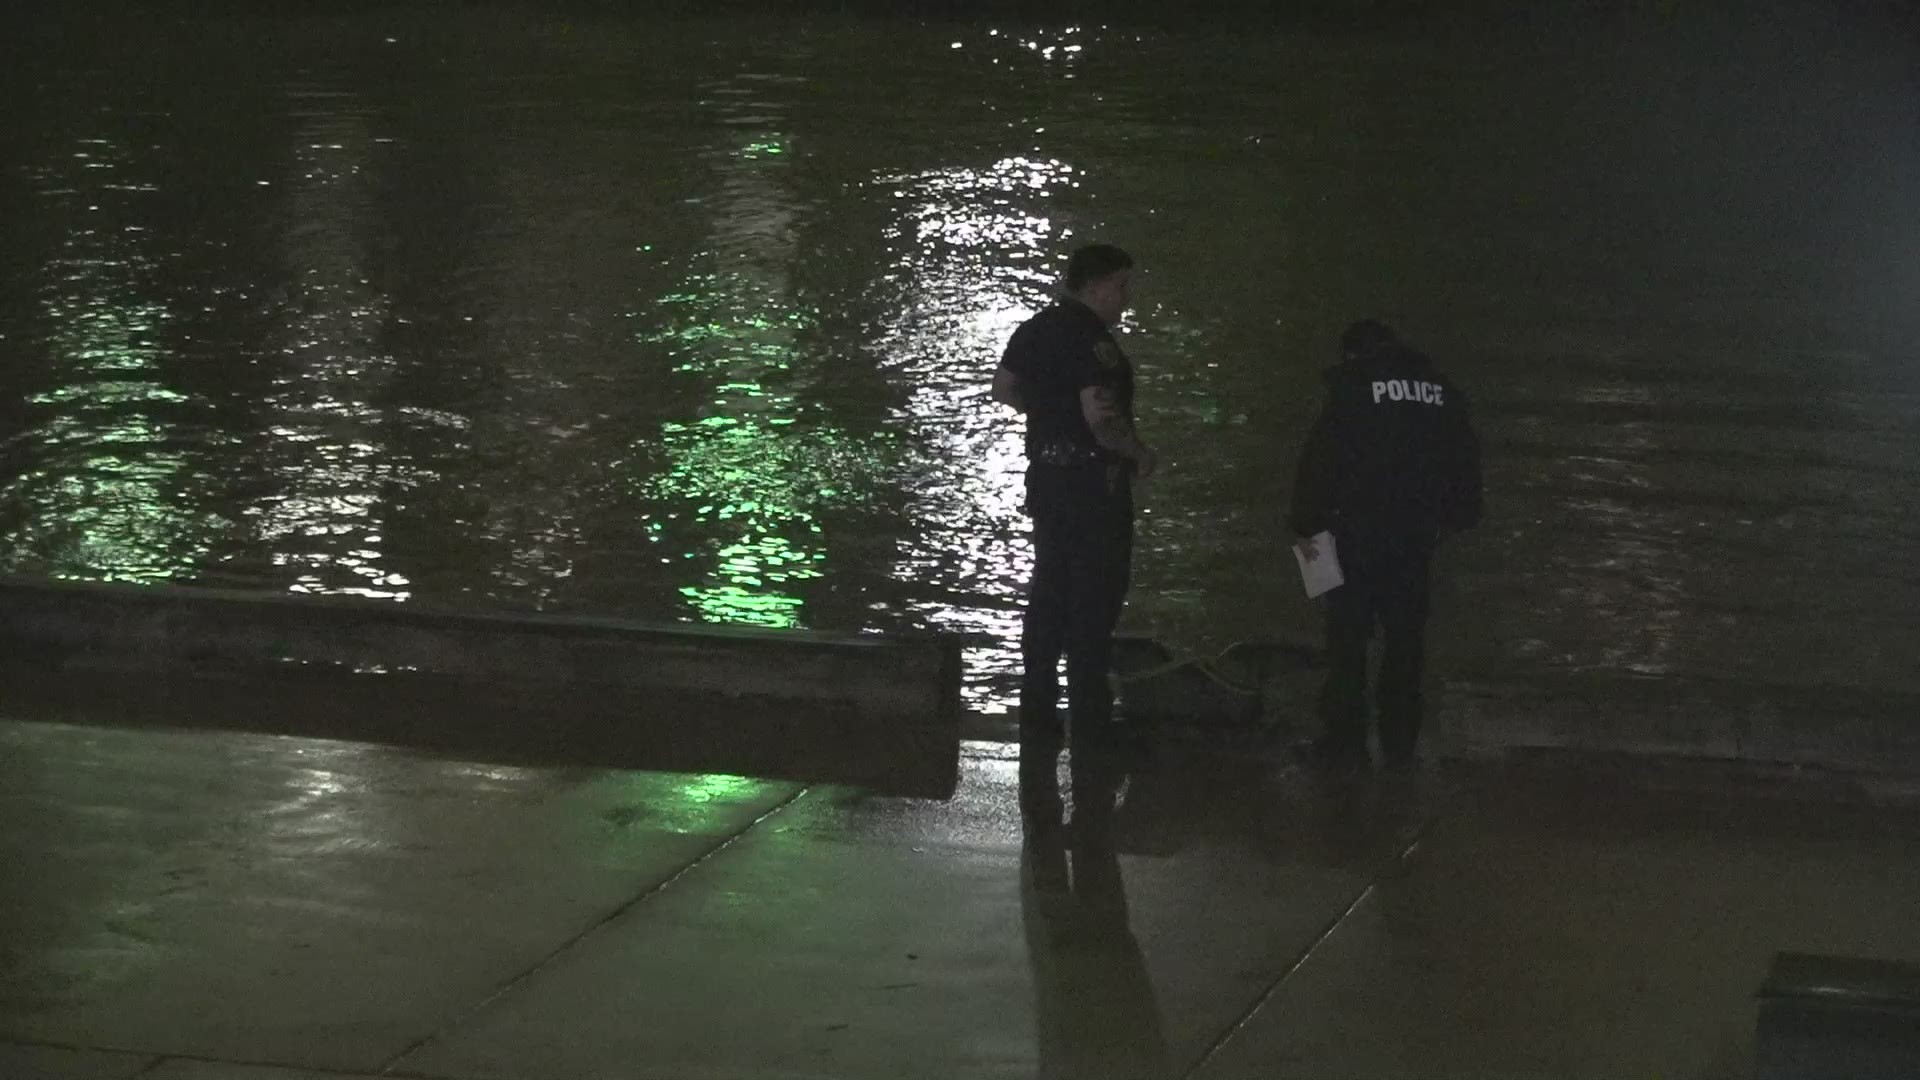 A man's body was found floating in Buffalo Bayou. A tour boat operator found the body. A medical examiner will determine the cause of death.